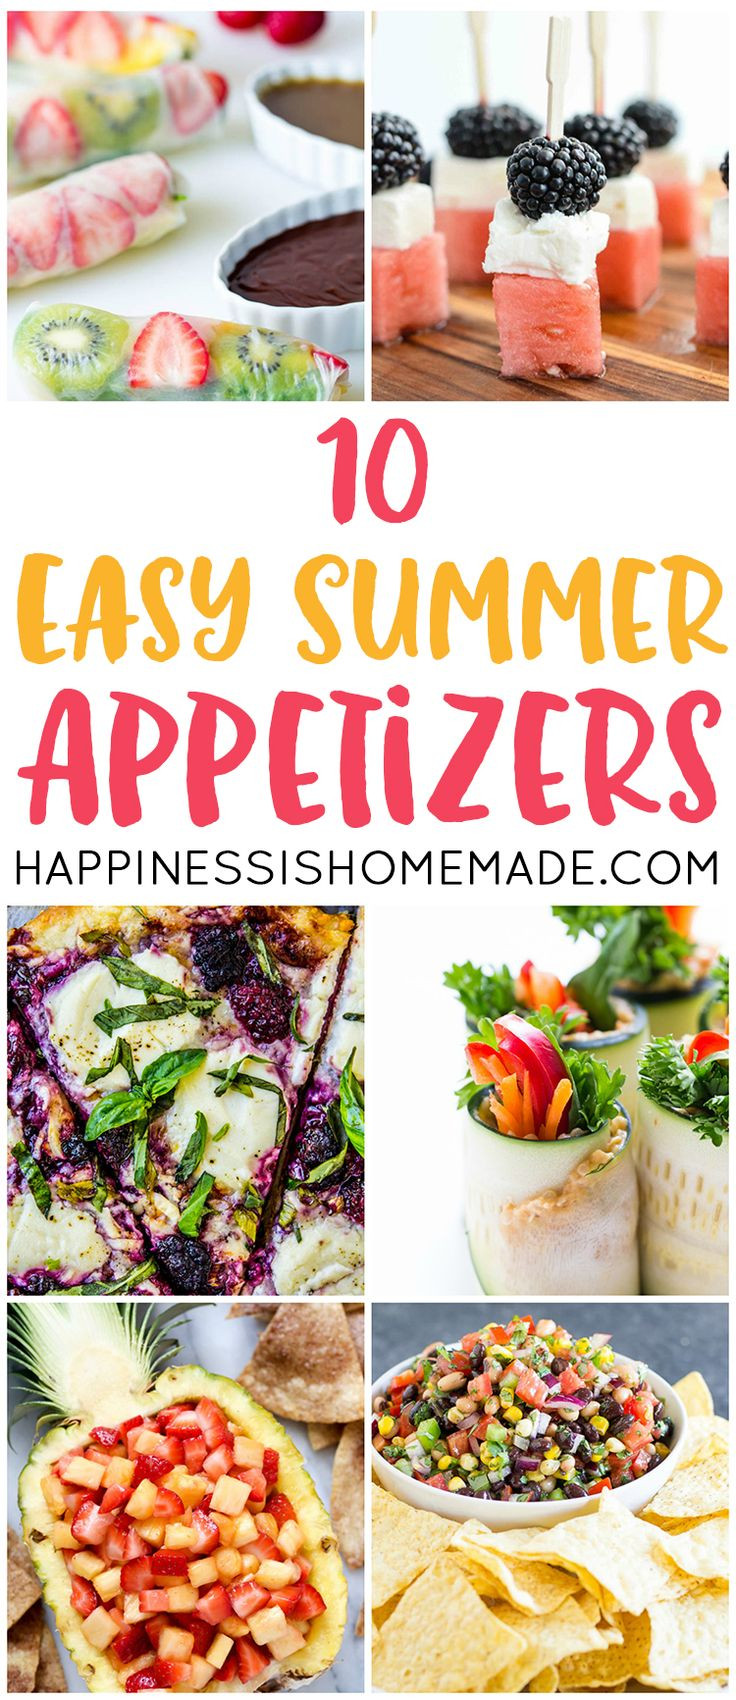 Summer Party Recipe Ideas
 1000 ideas about Easy Summer Appetizers on Pinterest